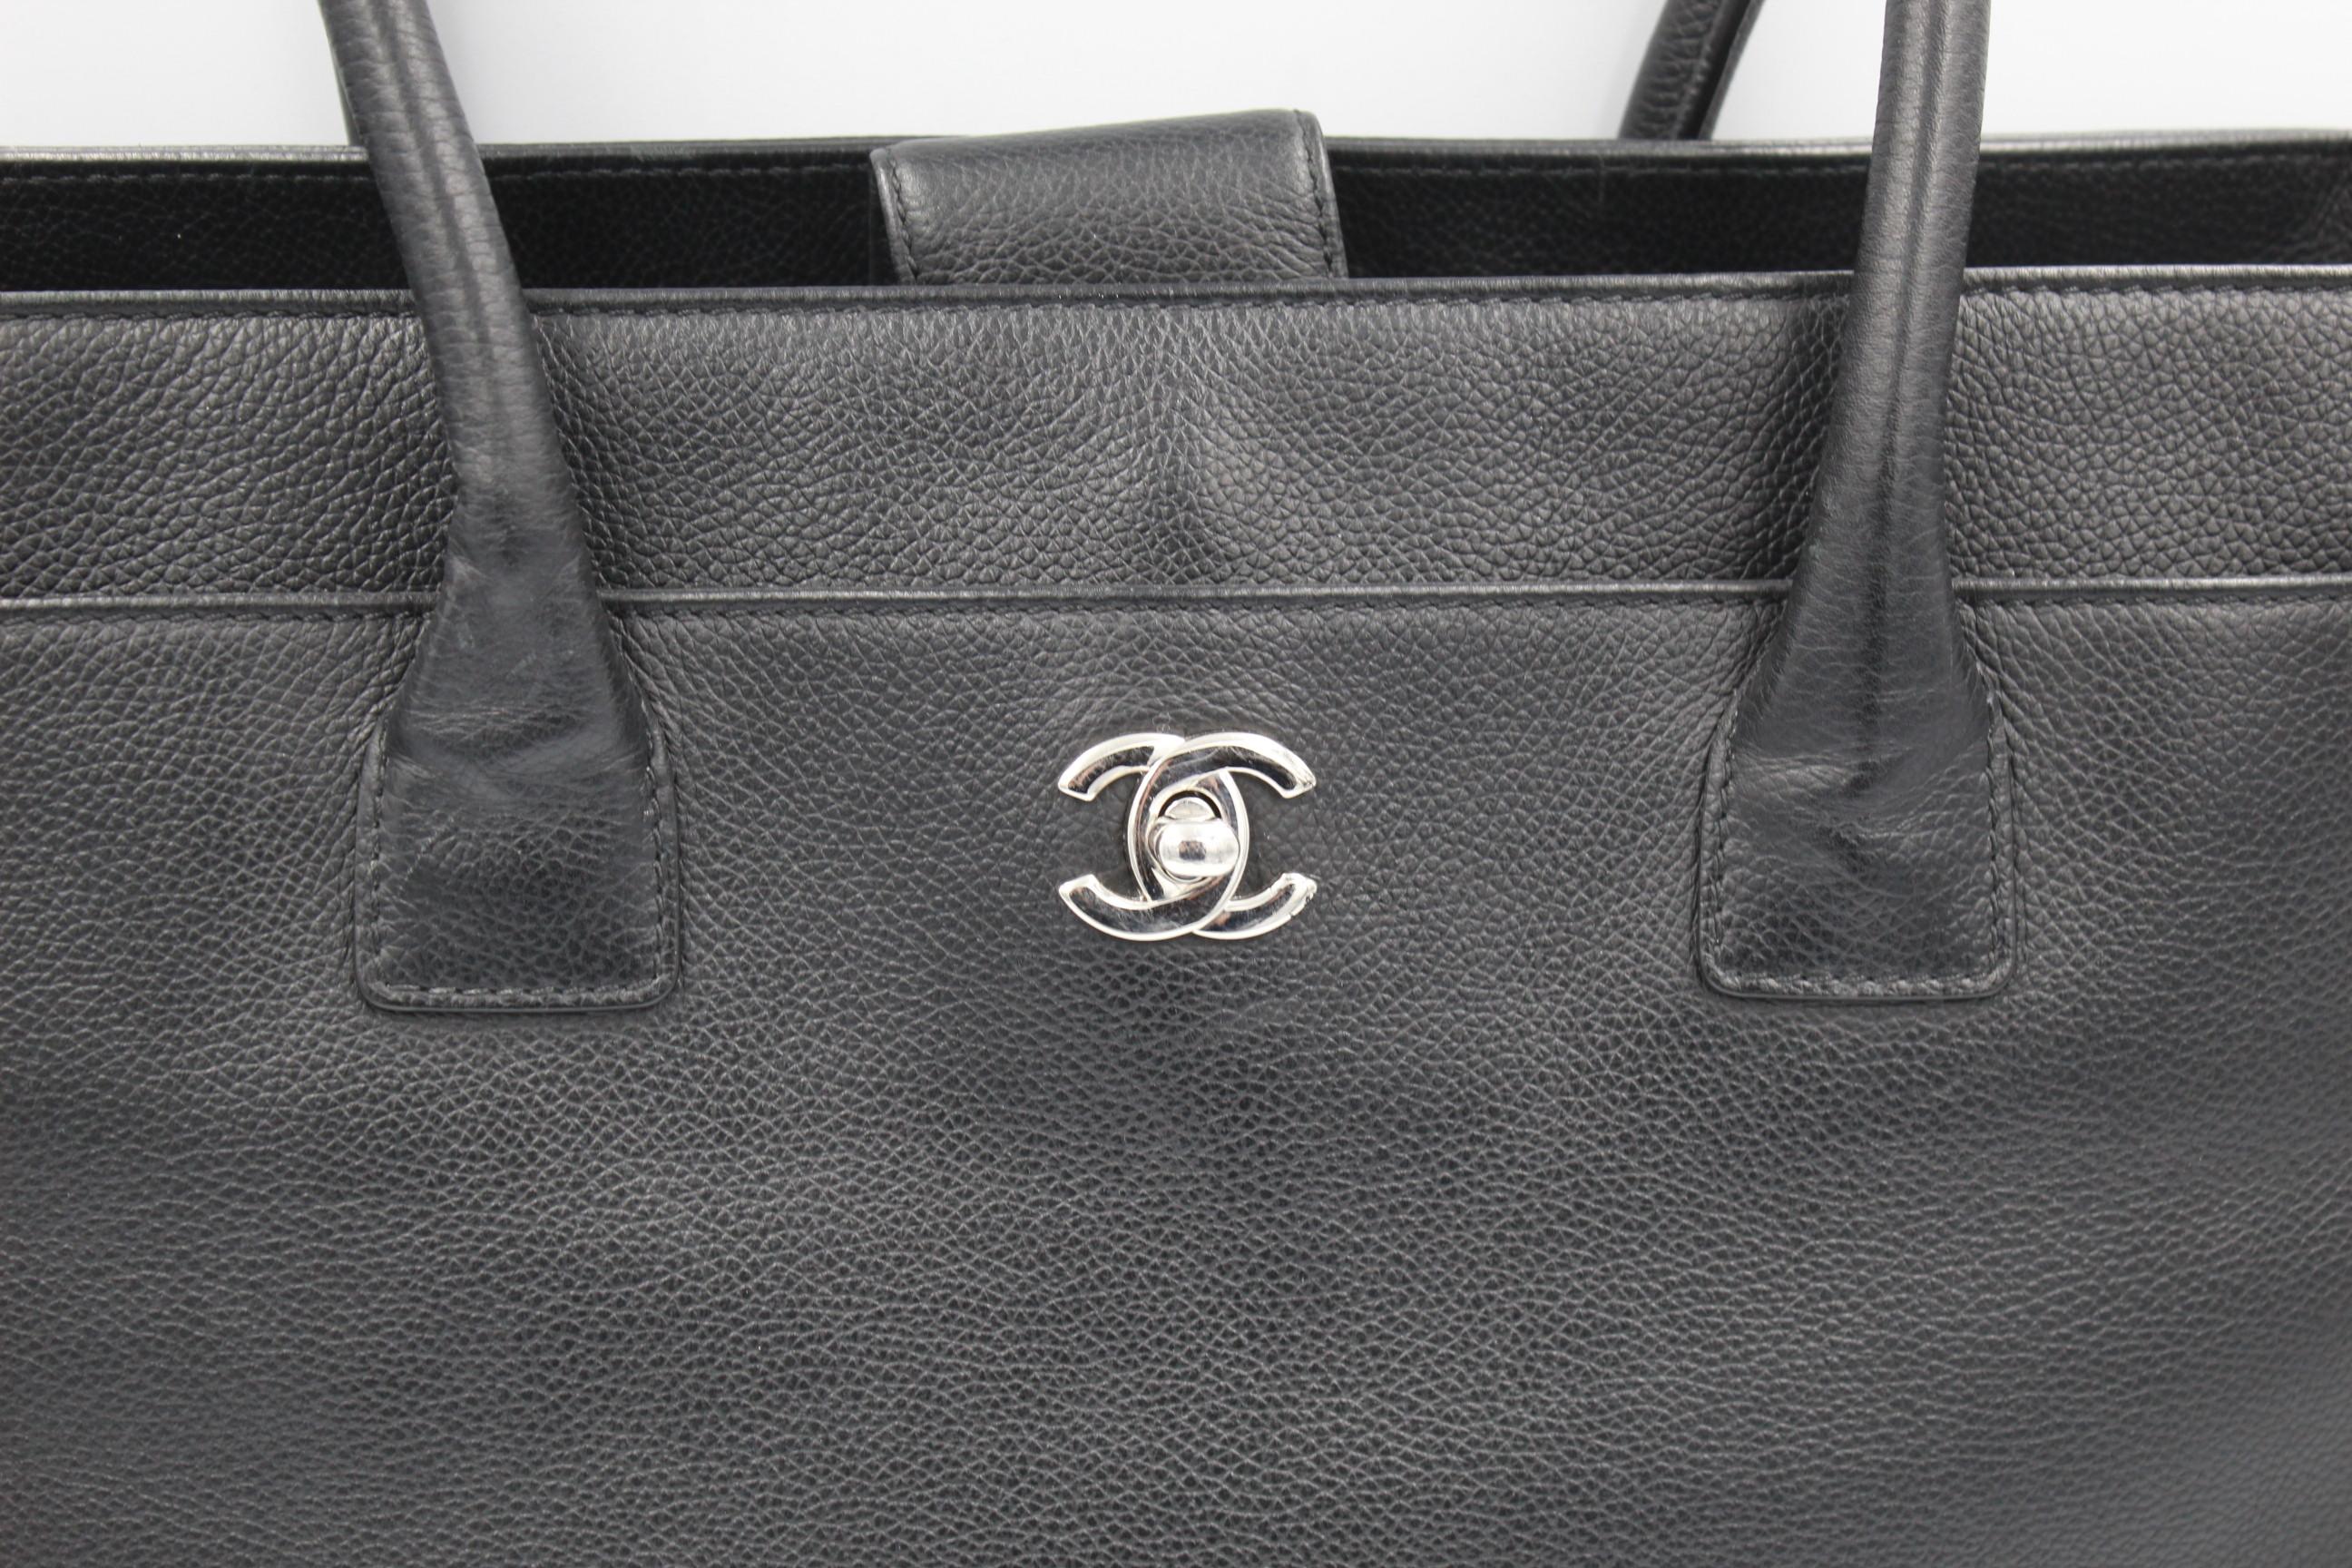 Chanel Black Tote bag in grained leather and palladium / silver hardware
Good condition some light signs of use
Comes wiht a copy of the payment receipt ( price in 2011 1790€)
Size 33*31 cm